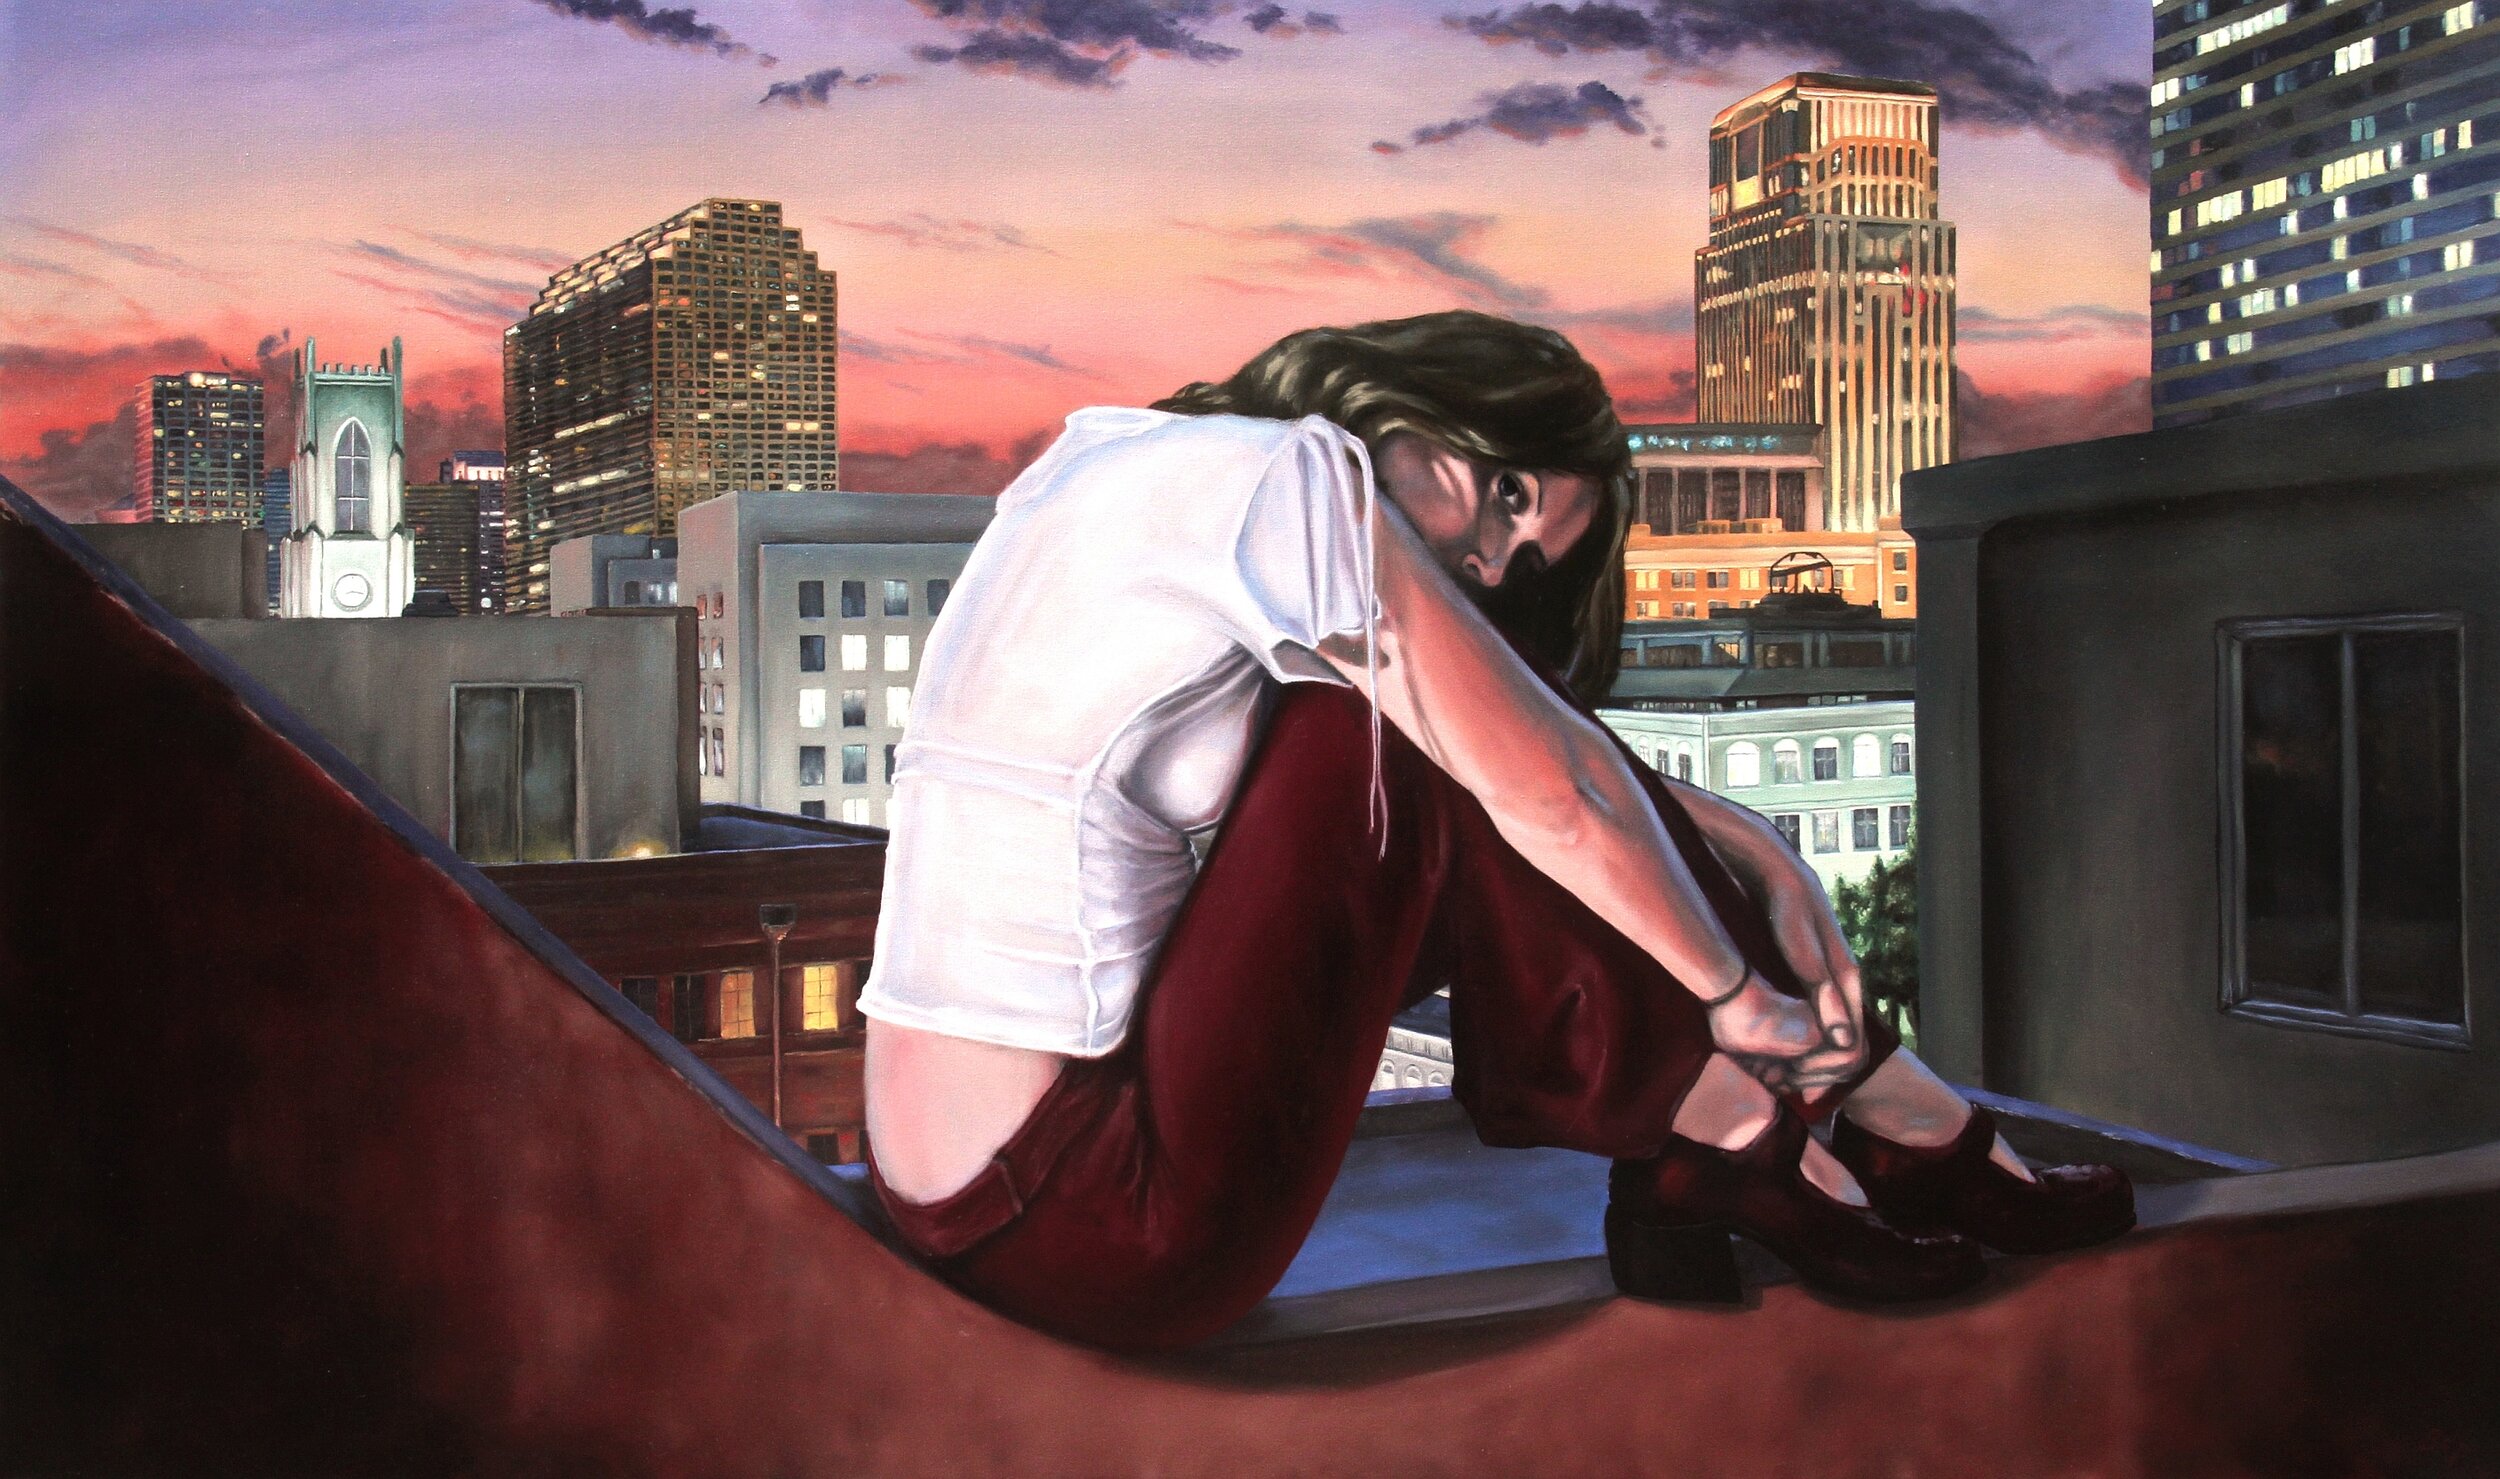 "City's Child" //Oil on canvas// by 2nd Edition Finalist, Benji Palus